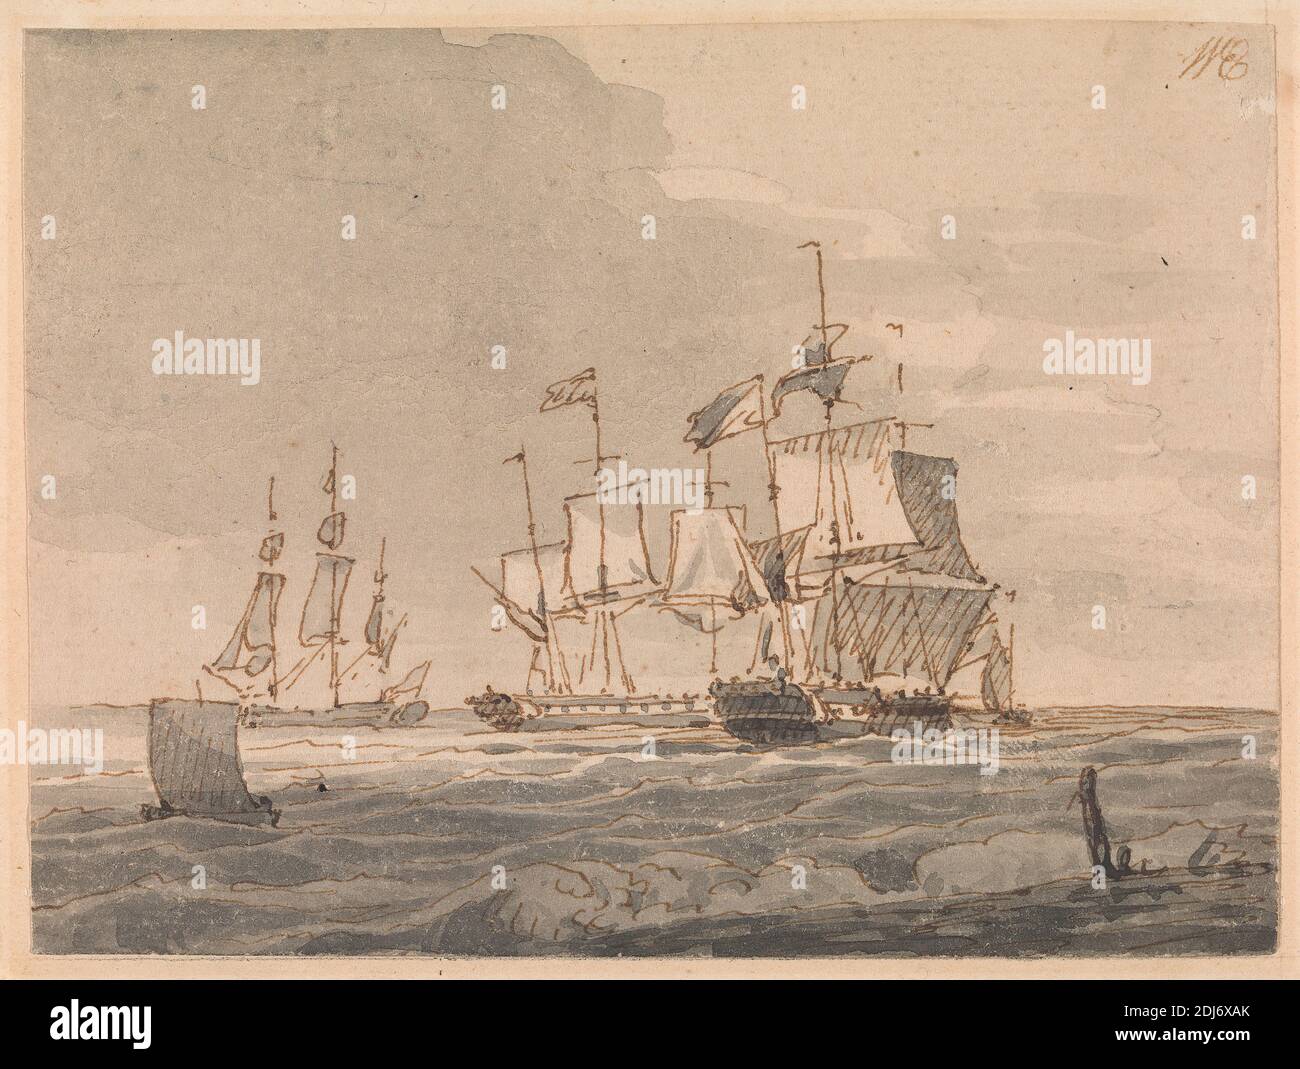 Men-of-war off the Coast, John Cleveley the younger, 1747–1786, British, undated, Gray wash, pen and brown ink on medium, moderately textured, cream laid paper mounted to beige, moderately textured, wove paper, Sheet: 3 3/4 × 5 inches (9.5 × 12.7 cm), coast, marine art, sails, sea, ships Stock Photo